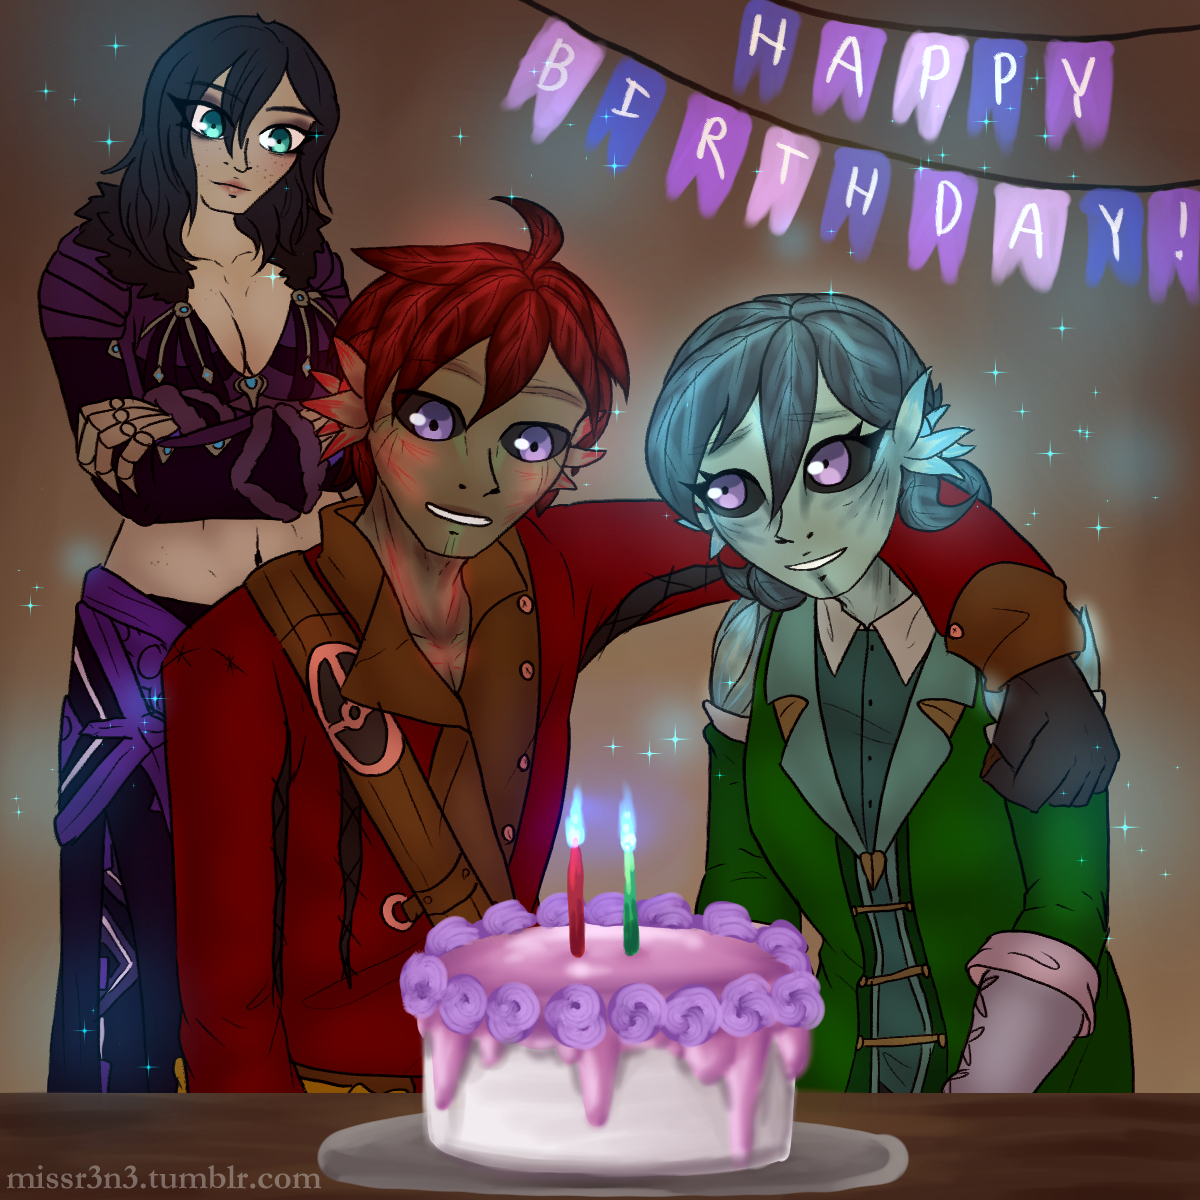 willow aldern and hazel aldern celebrate their birthday while laila aulikki watches over them. the twins are getting ready to blow out the candles on their pink and white birthday cake. blue sparkles from laila's mesmer magic are visible around the room